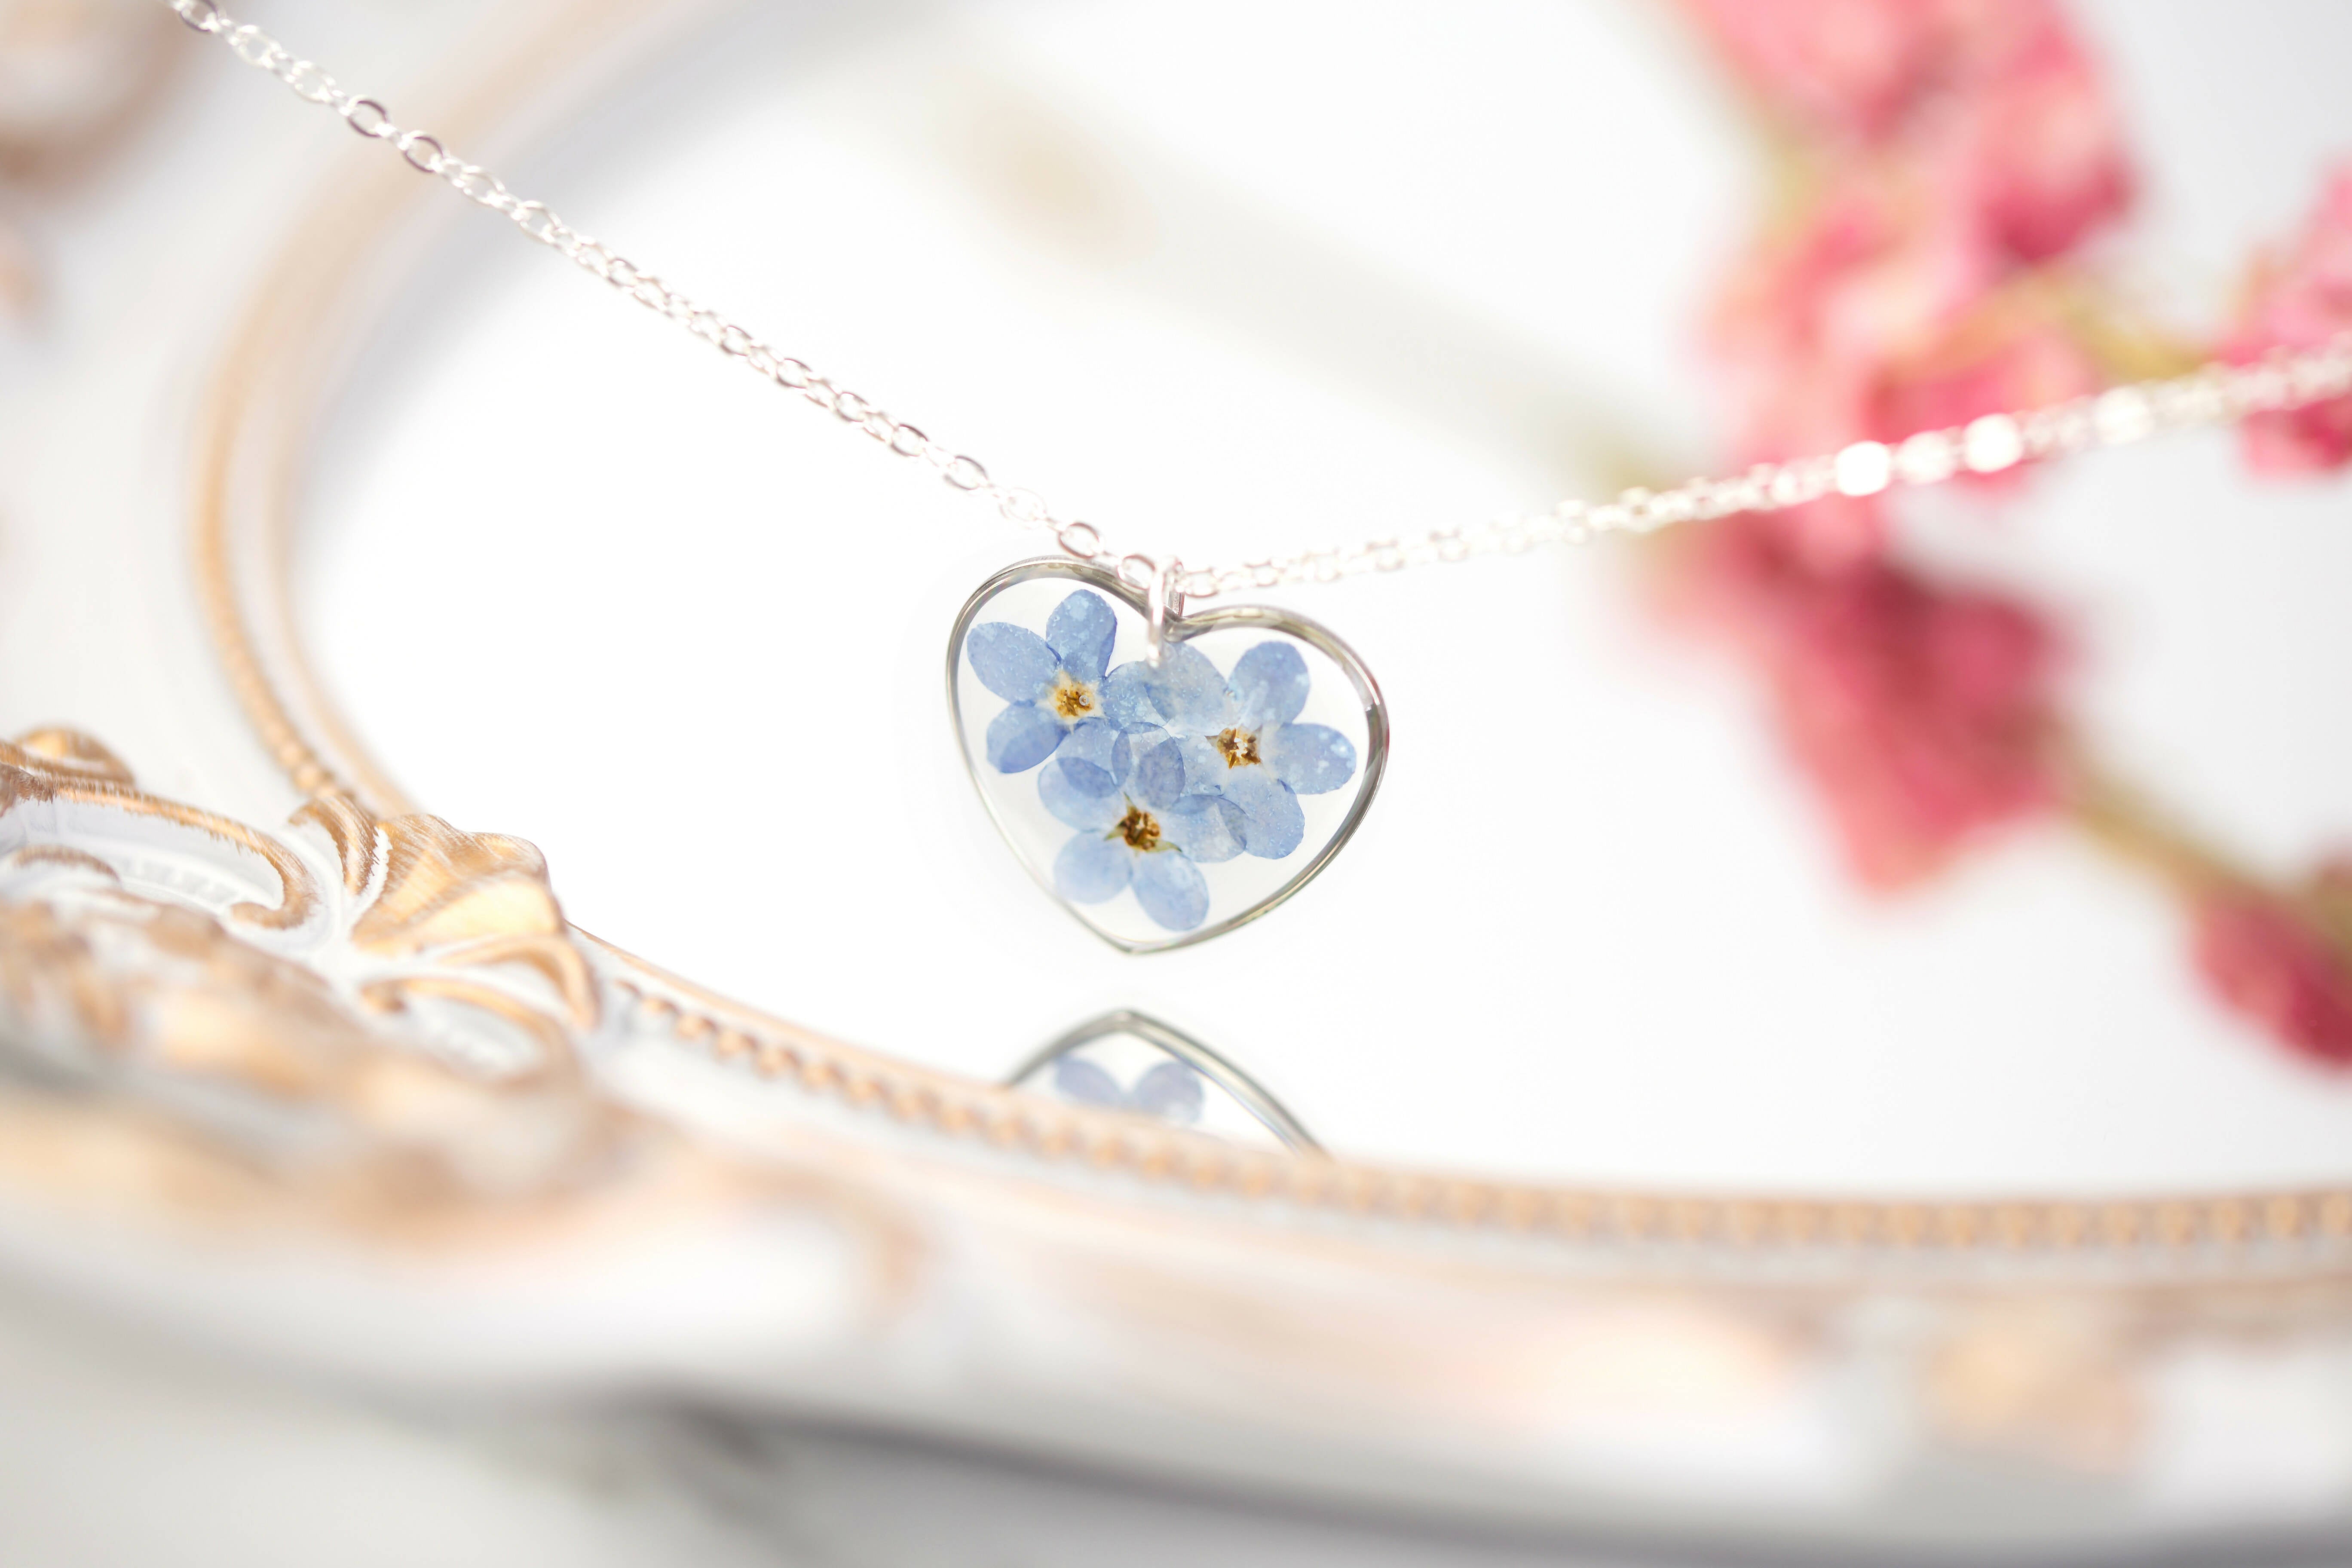 Forget Me Not Heart Necklace Silver Plated